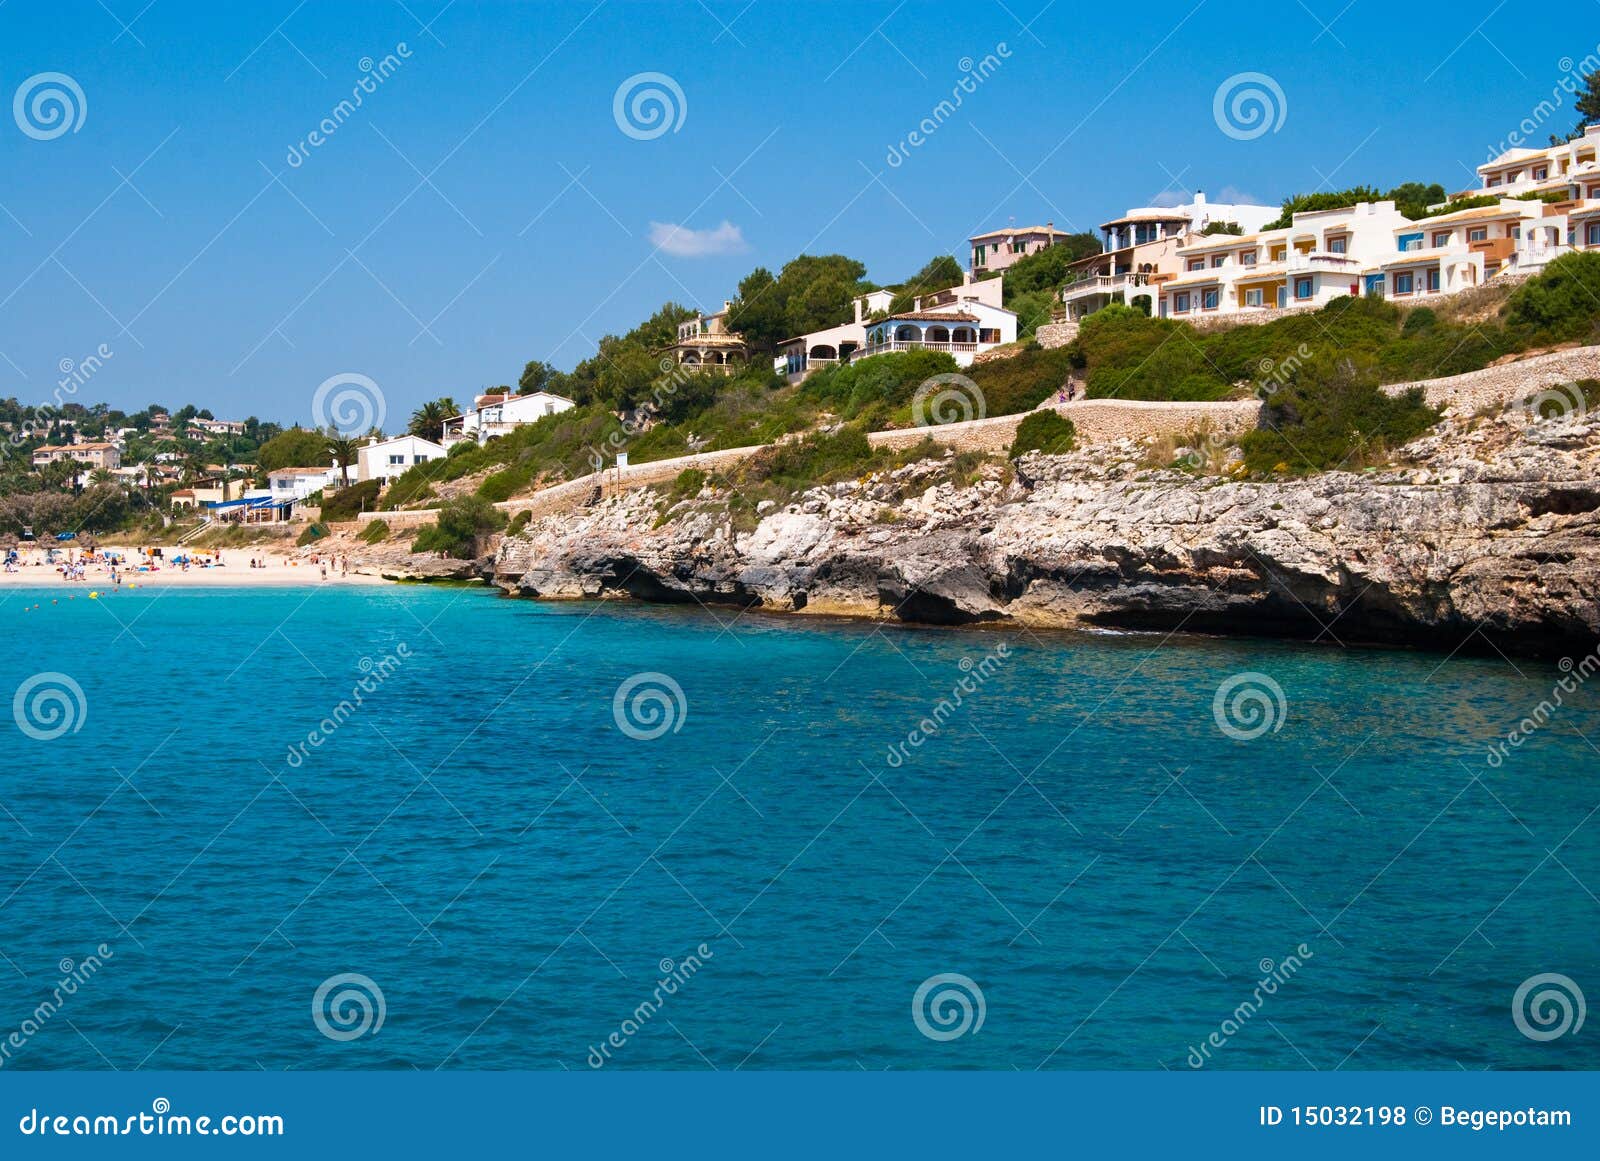 hotels and the beach - view at cala romantica